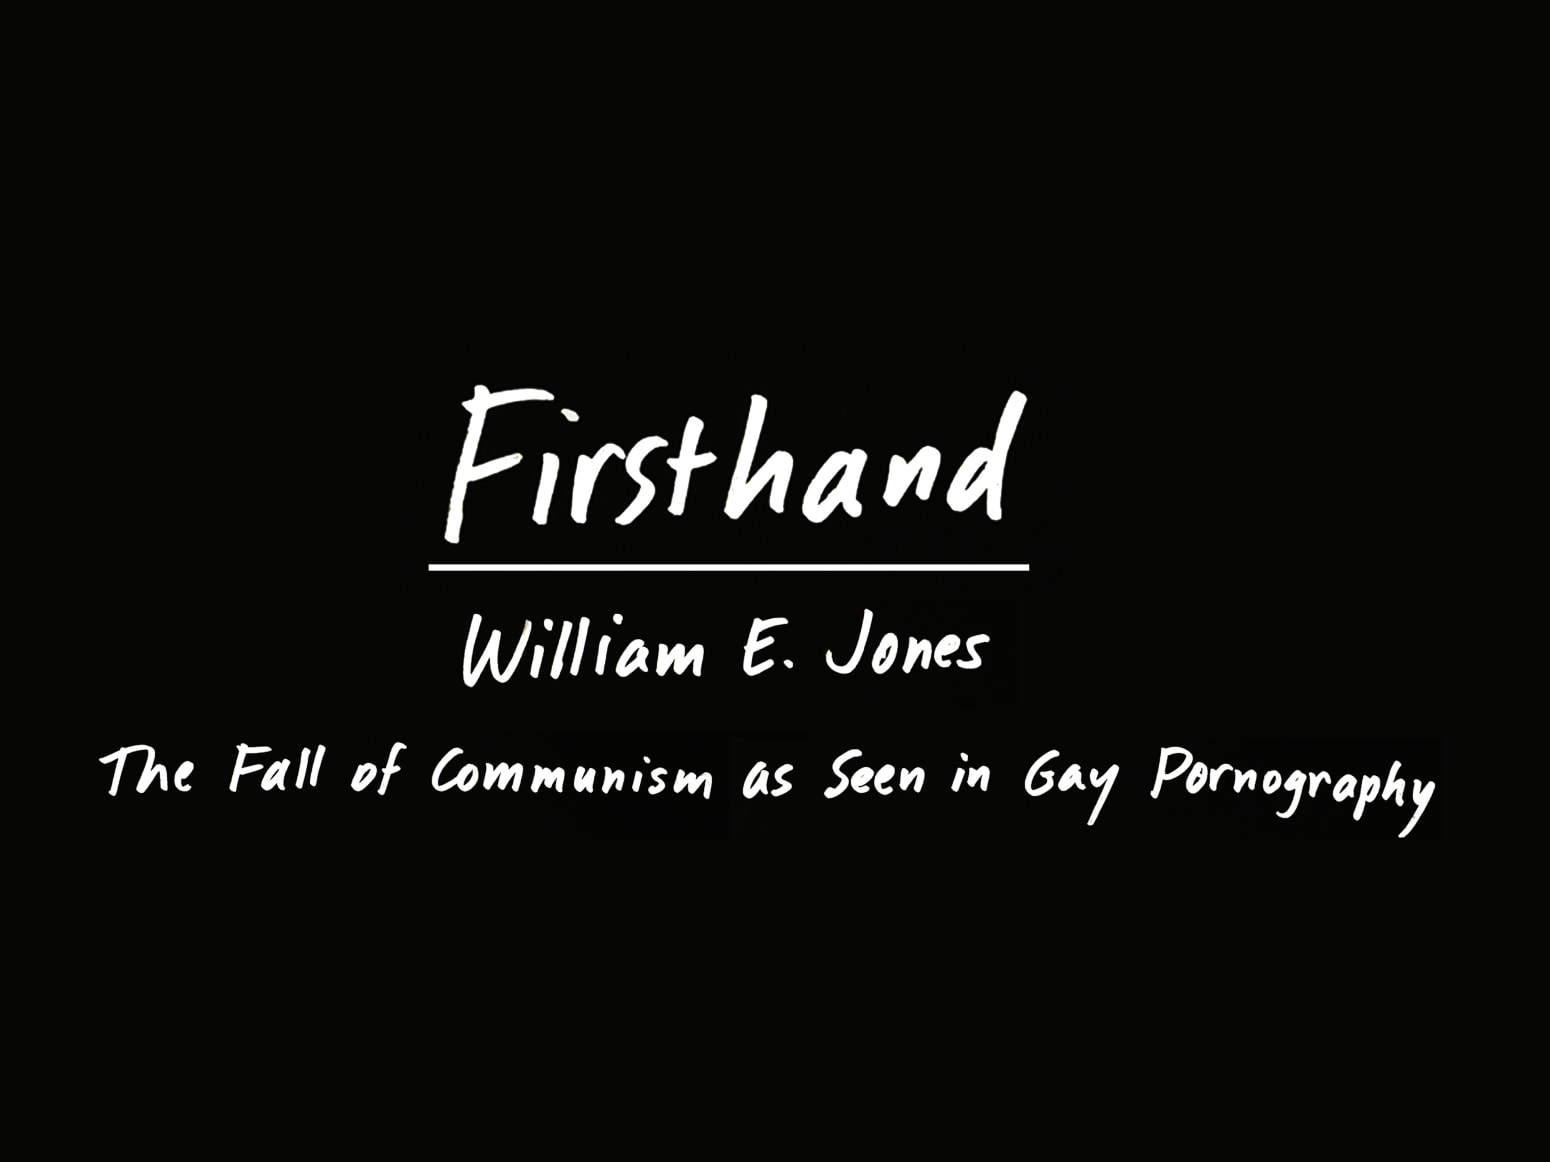 Oldest Gay Porn Evidence - Firsthand: William E. Jones - The Fall of Communism as Seen in Gay  Pornography - Viewing Room - David Kordansky Gallery